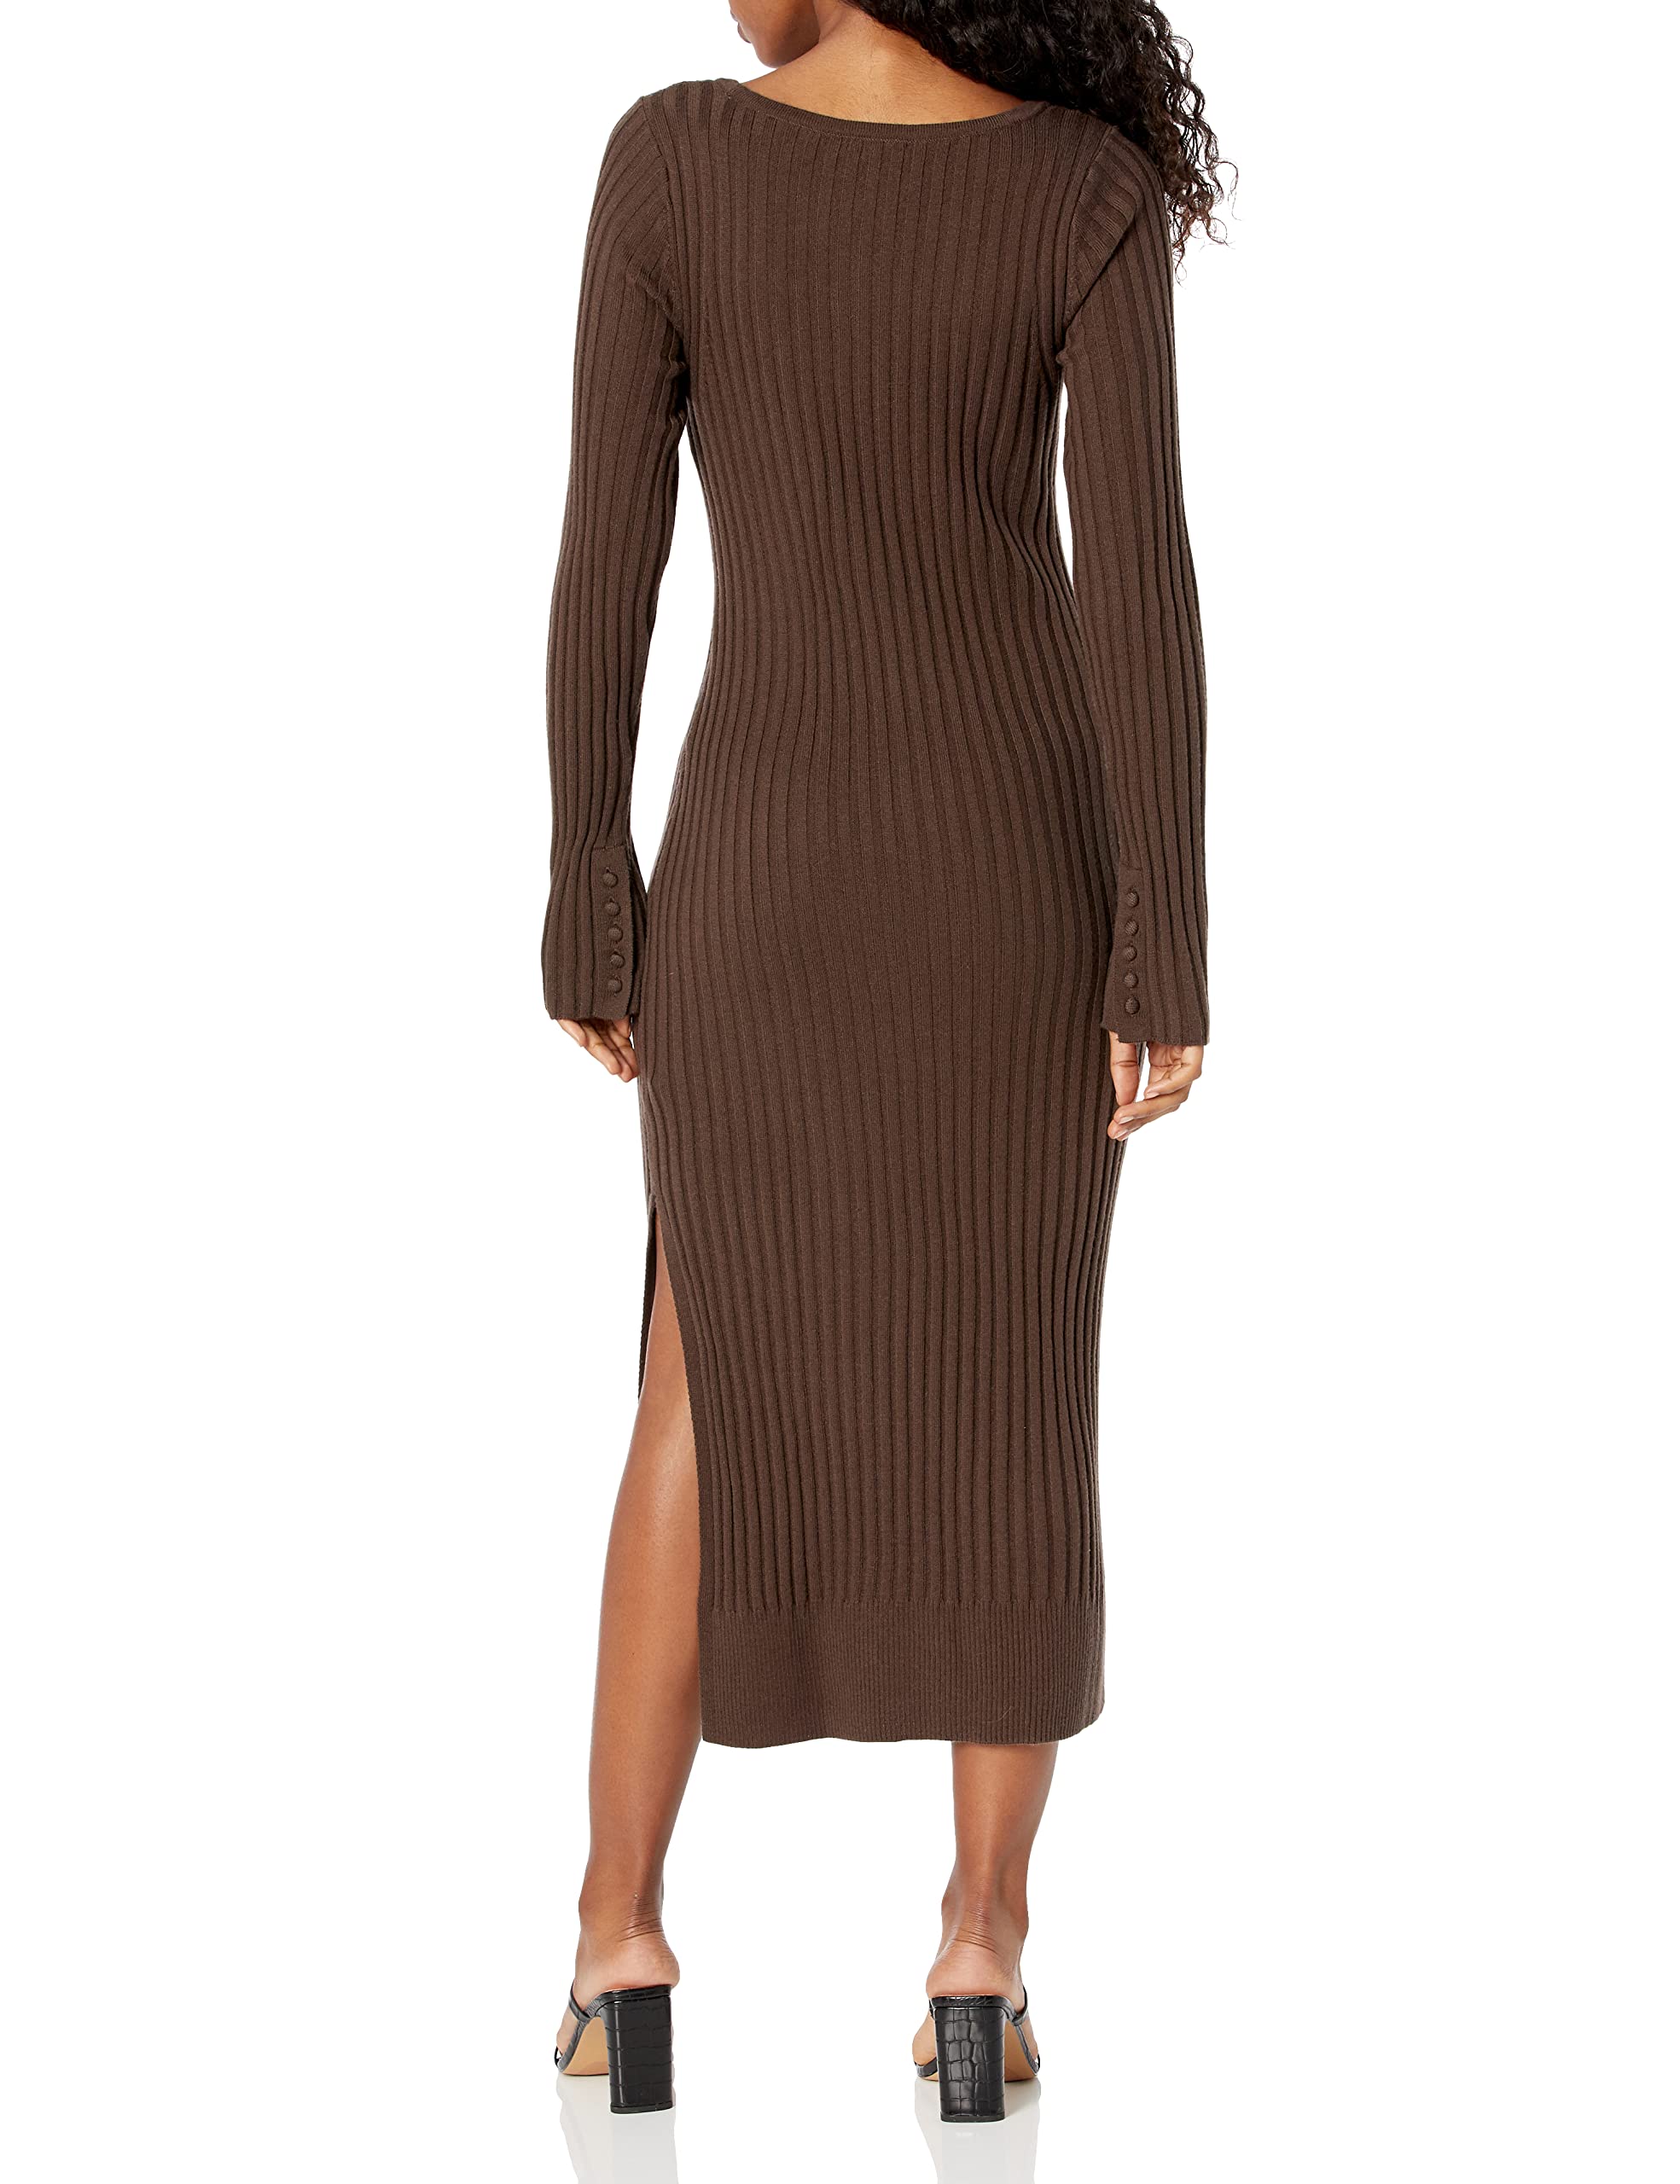 PAIGE Women's Benita Dress Long Sleeve Square Neckline Below The Knee in Brown Taupe